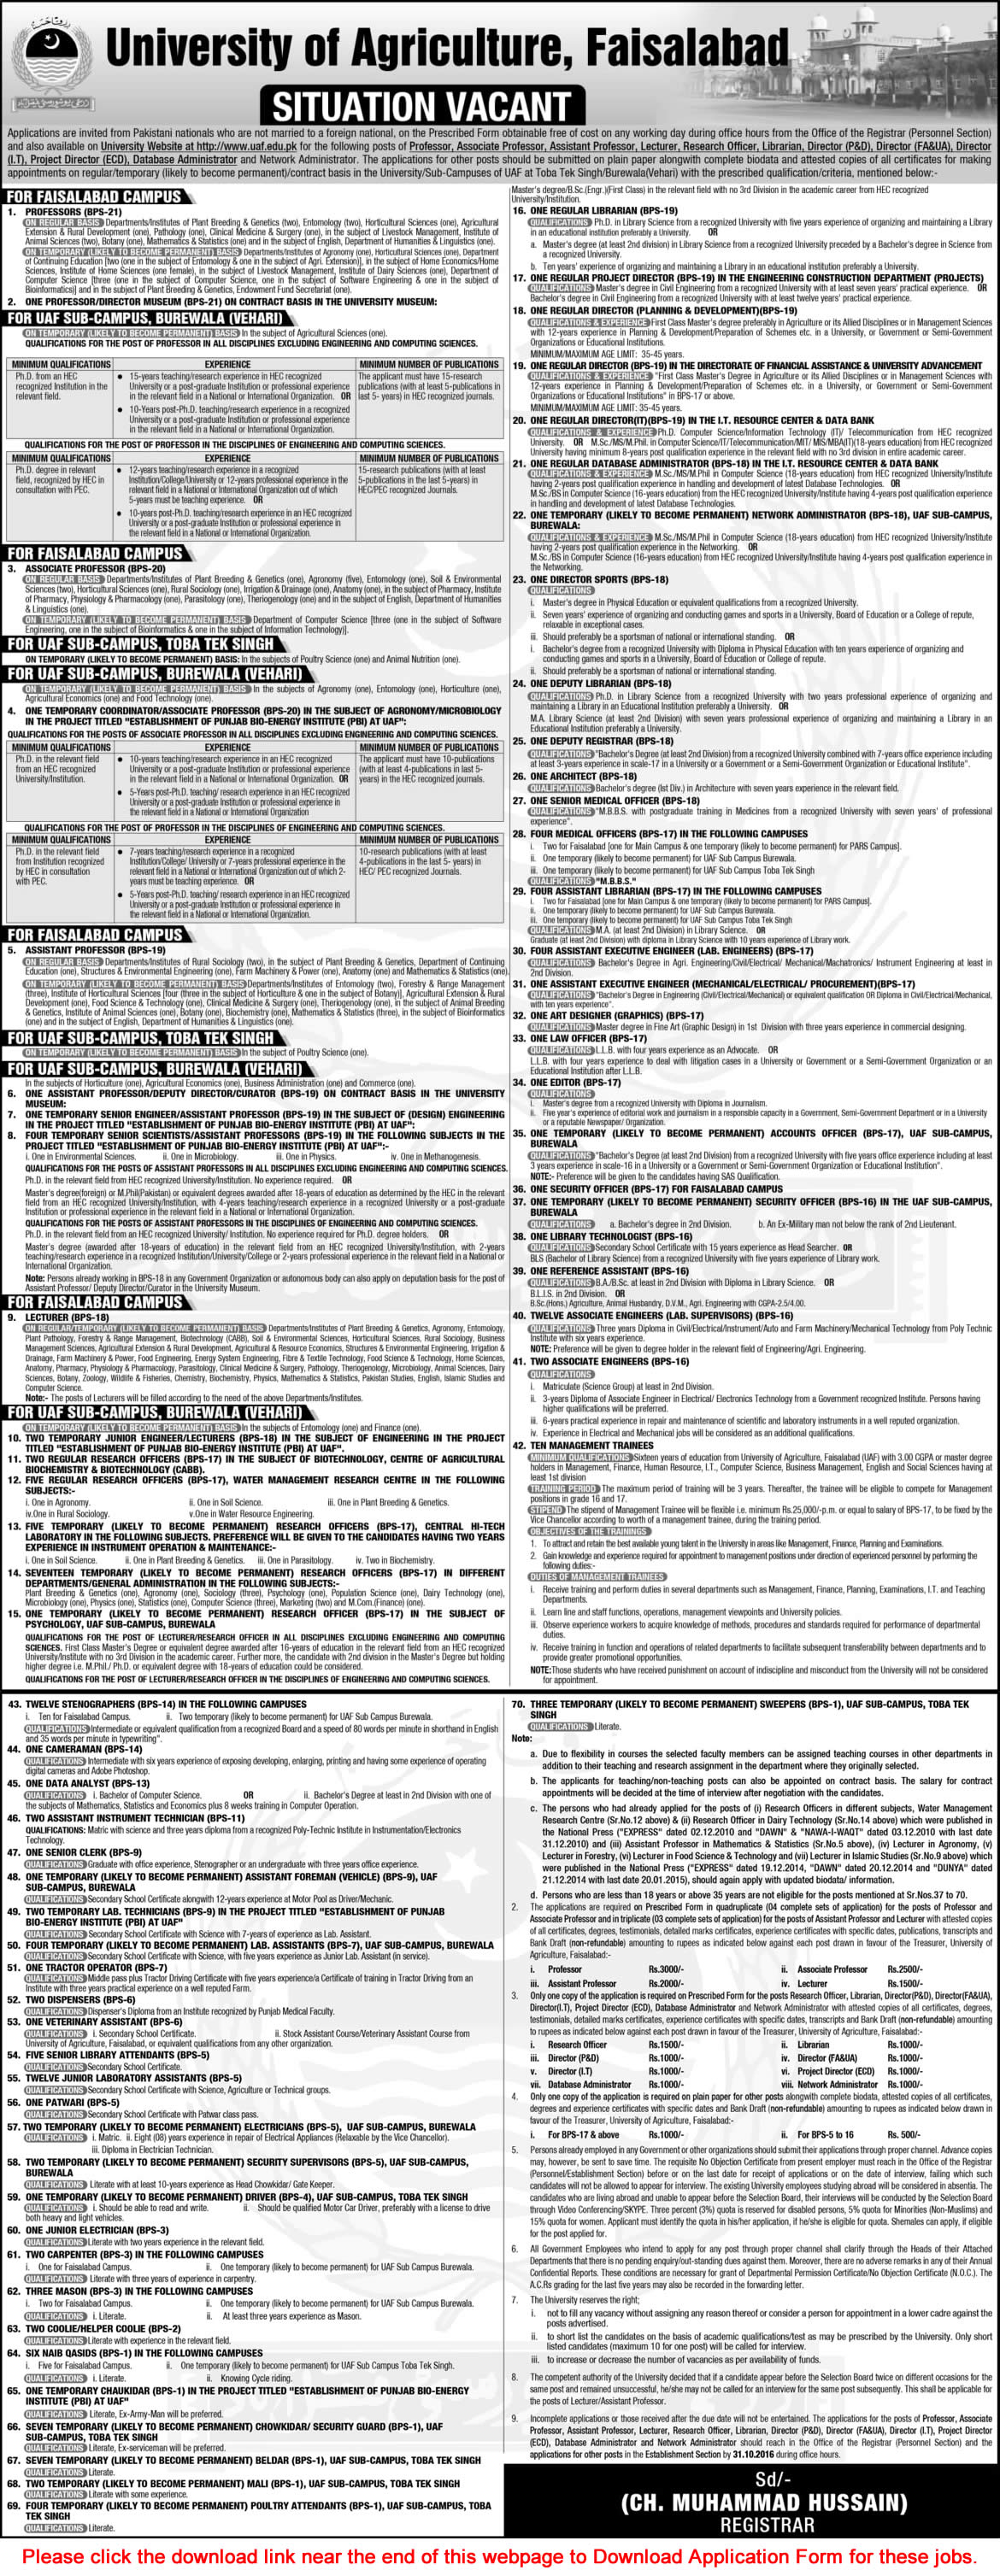 University of Agriculture Faisalabad Jobs September 2016 Application Form Teaching Faculty & Others Latest